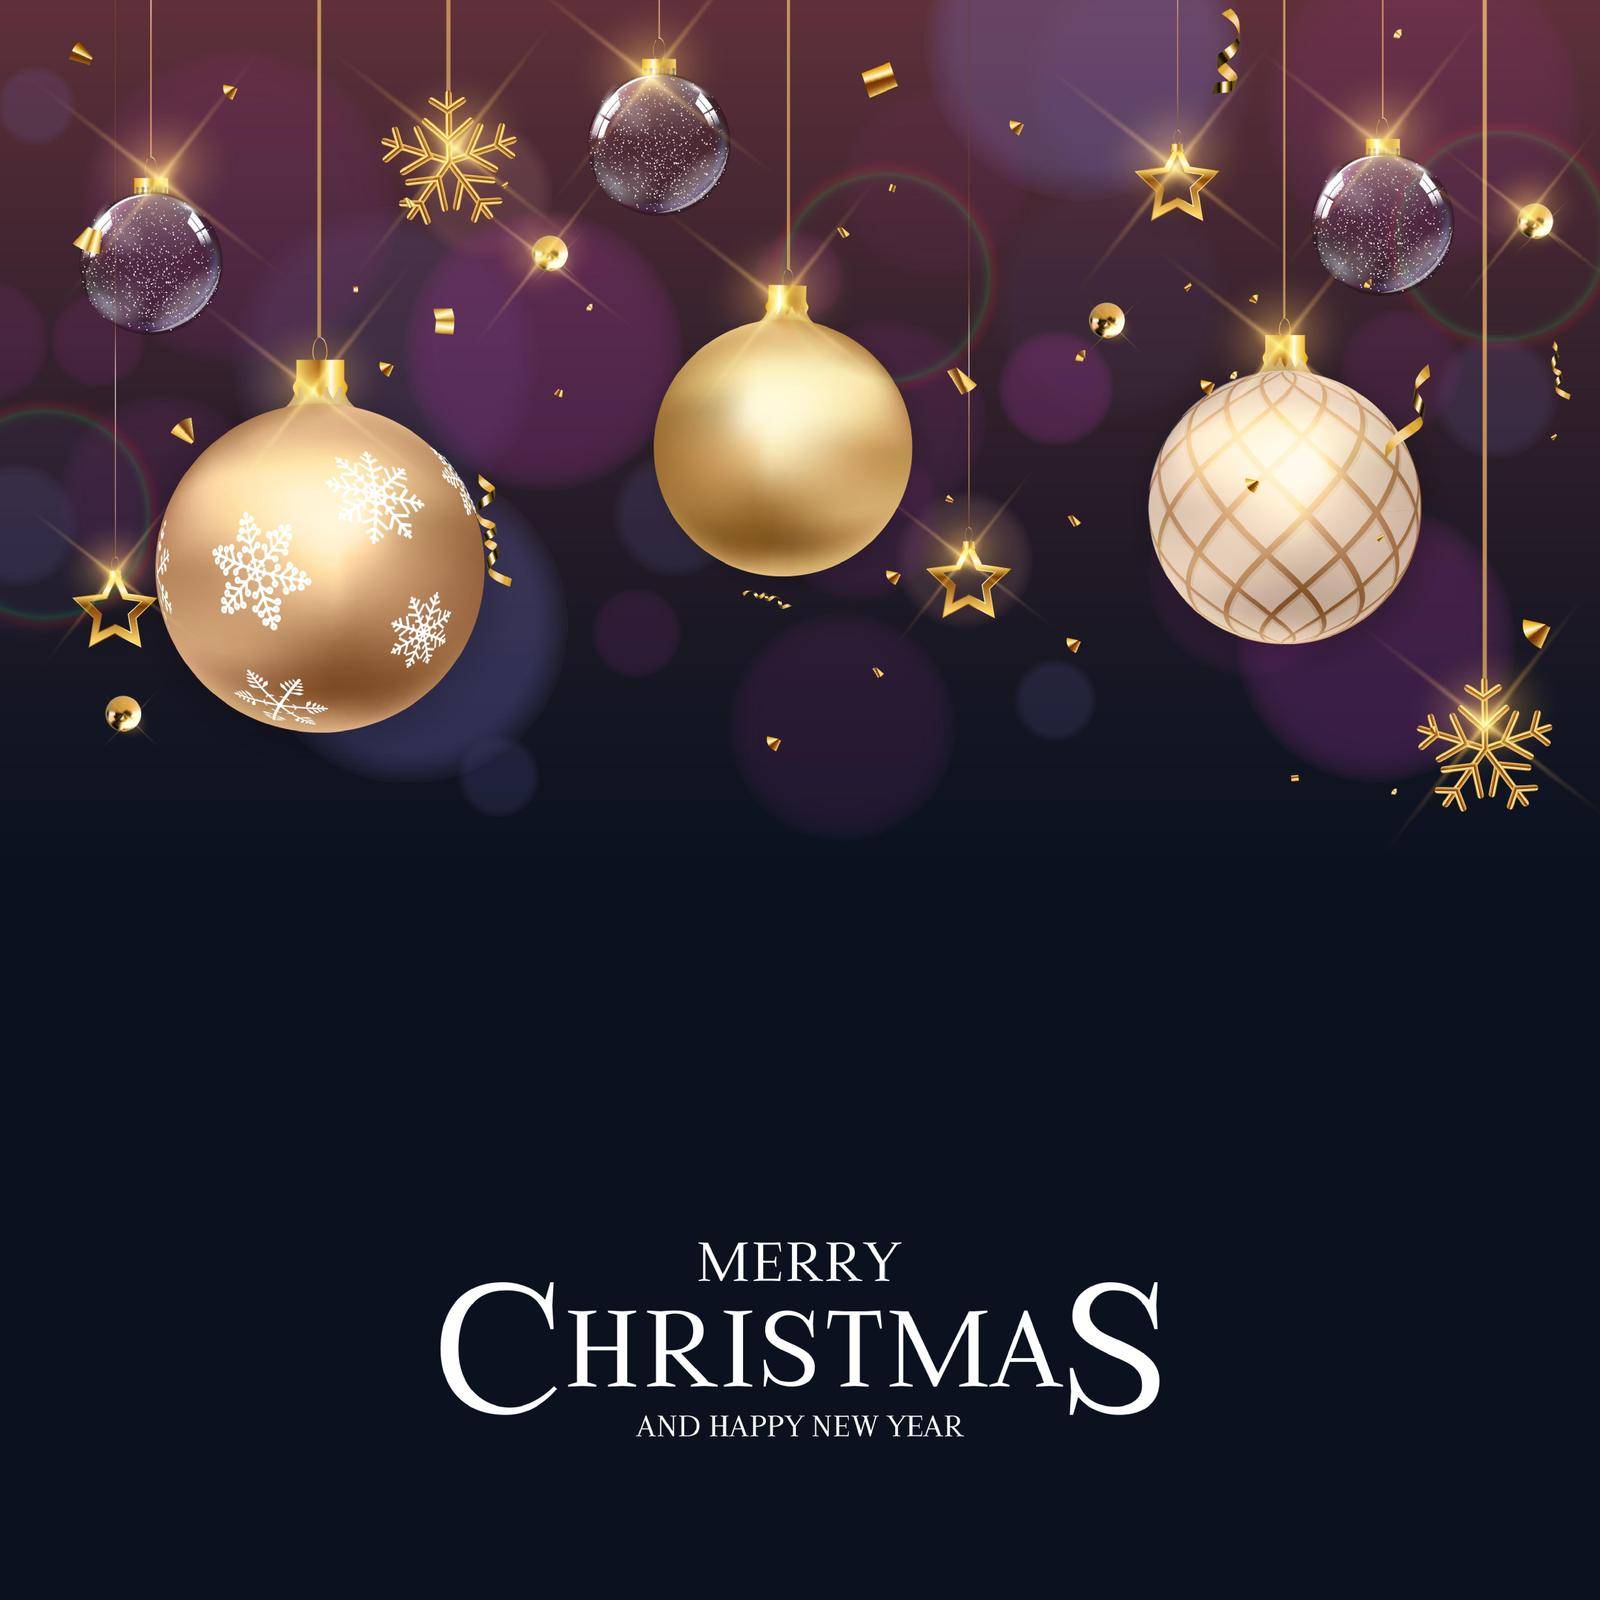 Christmas Holiday Party Background. Happy New Year and Merry Christmas Poster Template. Vector Illustration.